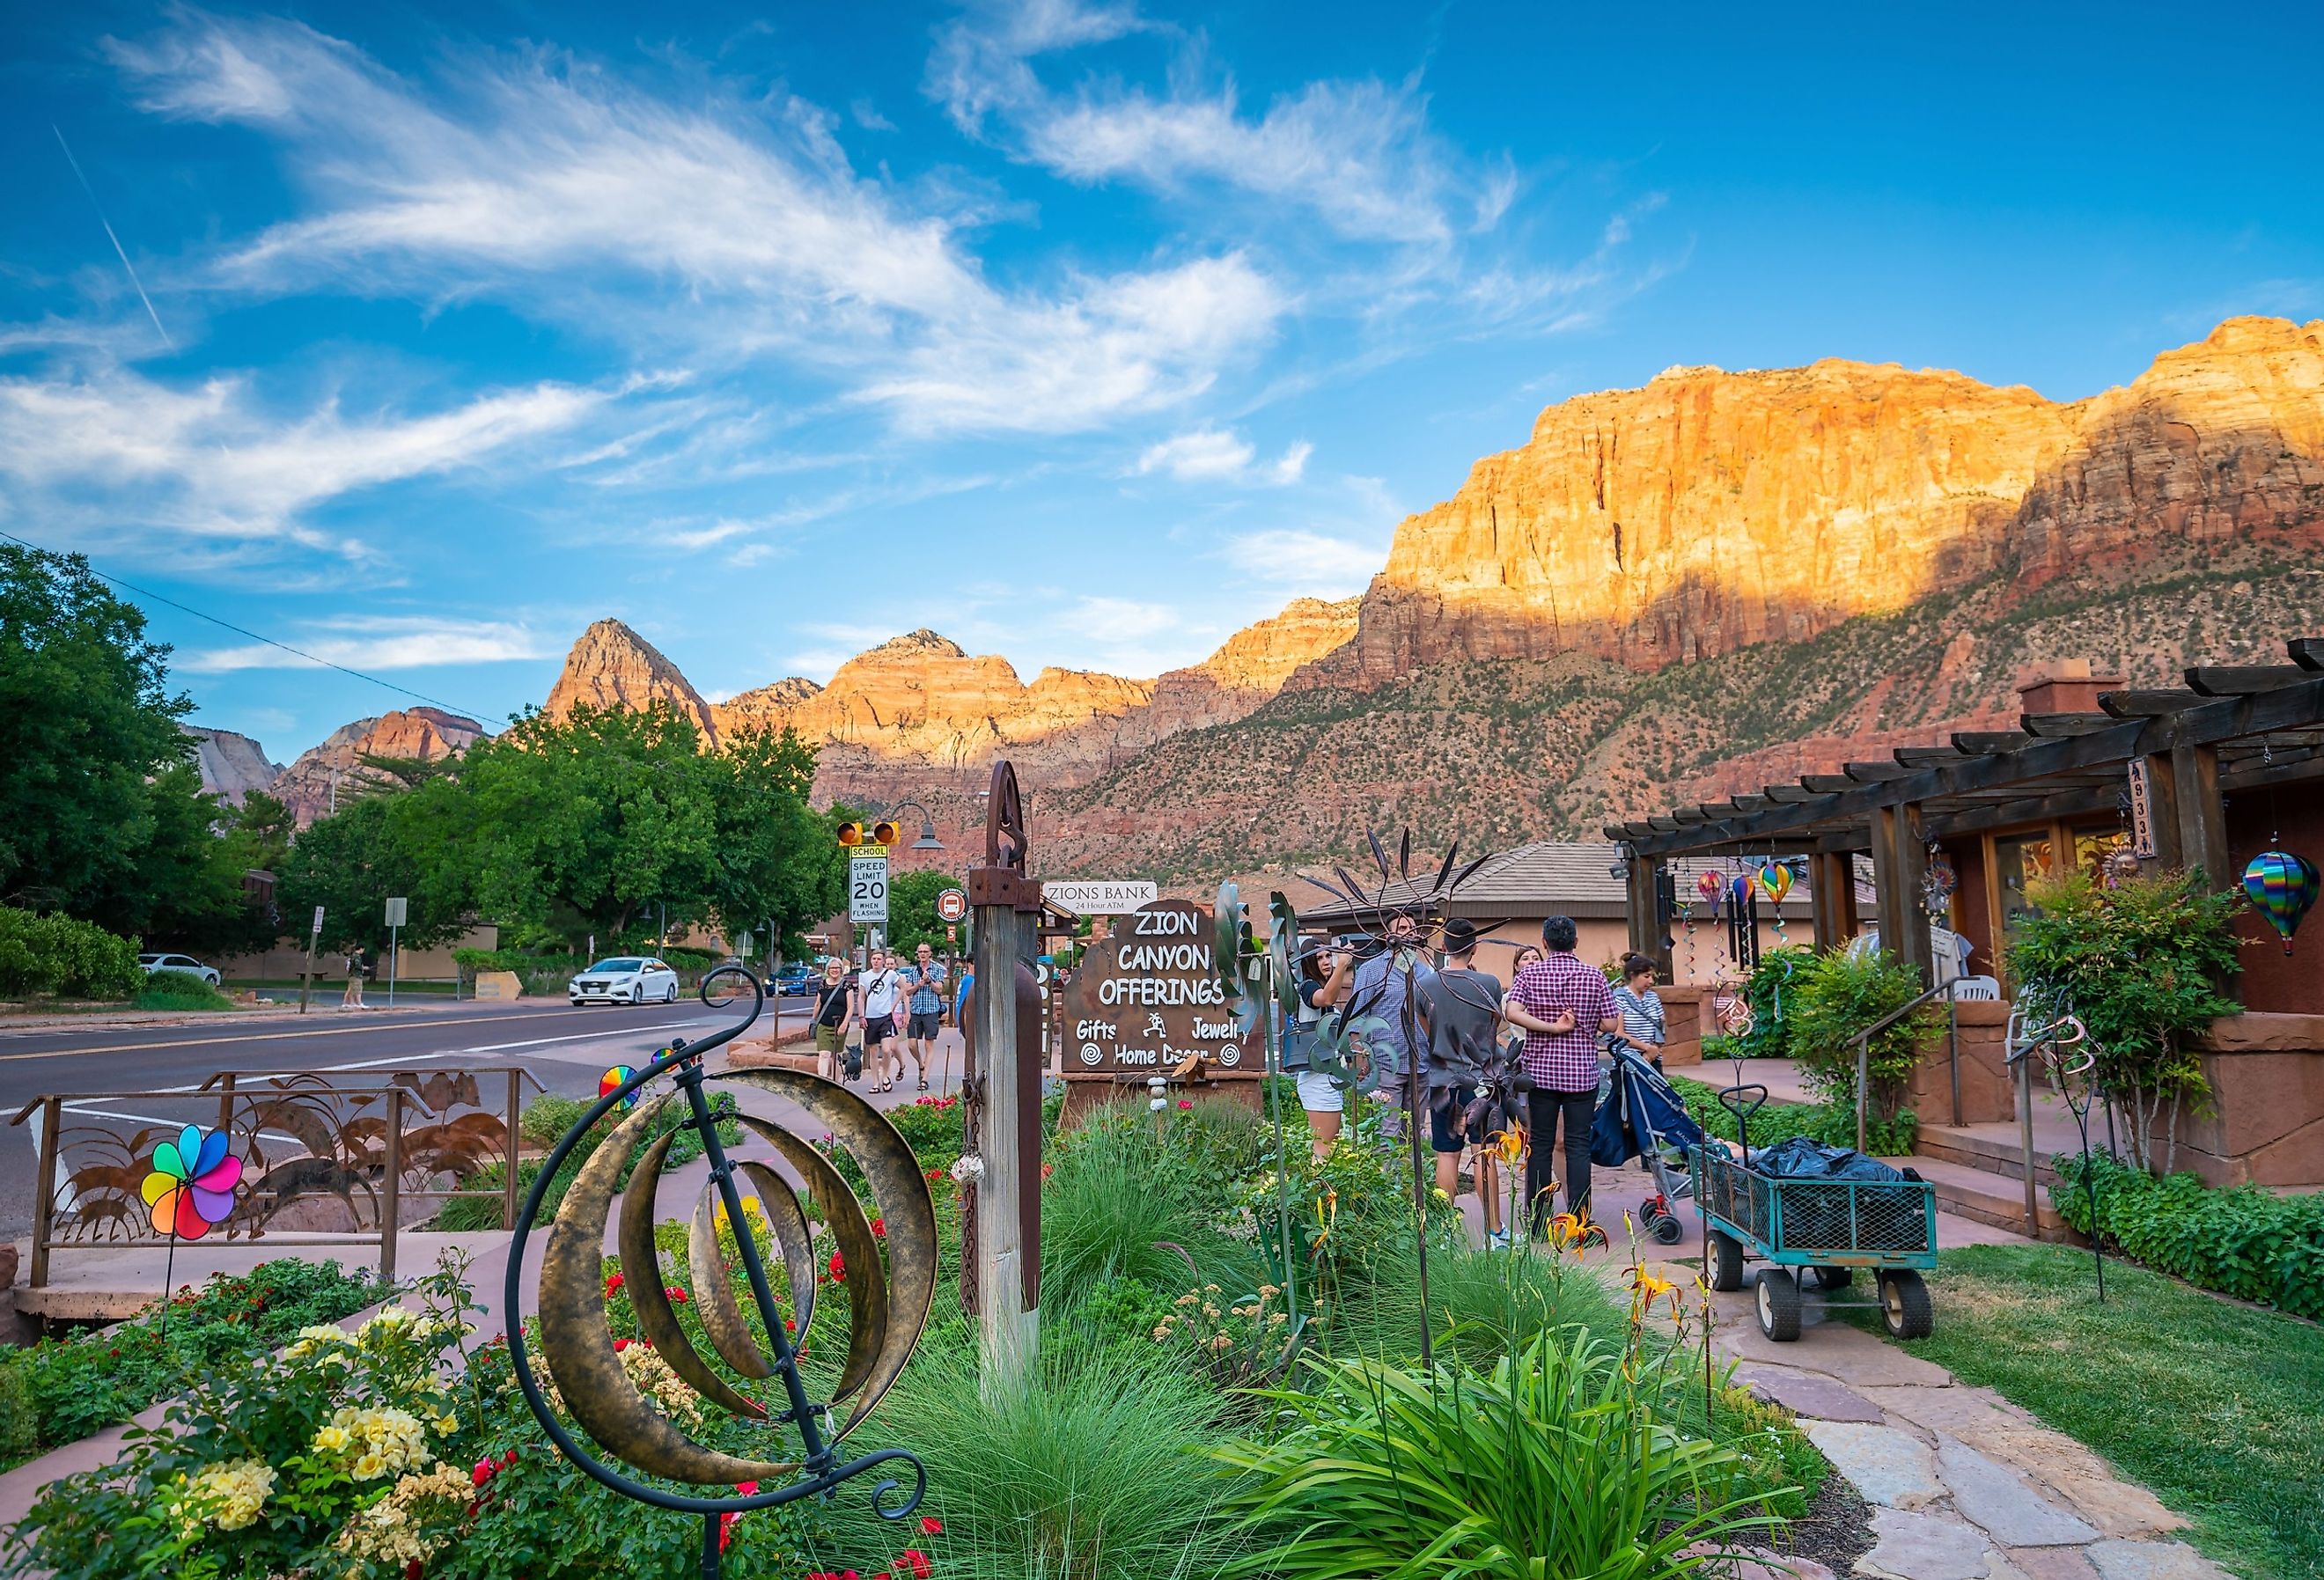 A small local town near the Zion National Park entrance. Image credit f11photo via Shutterstock.